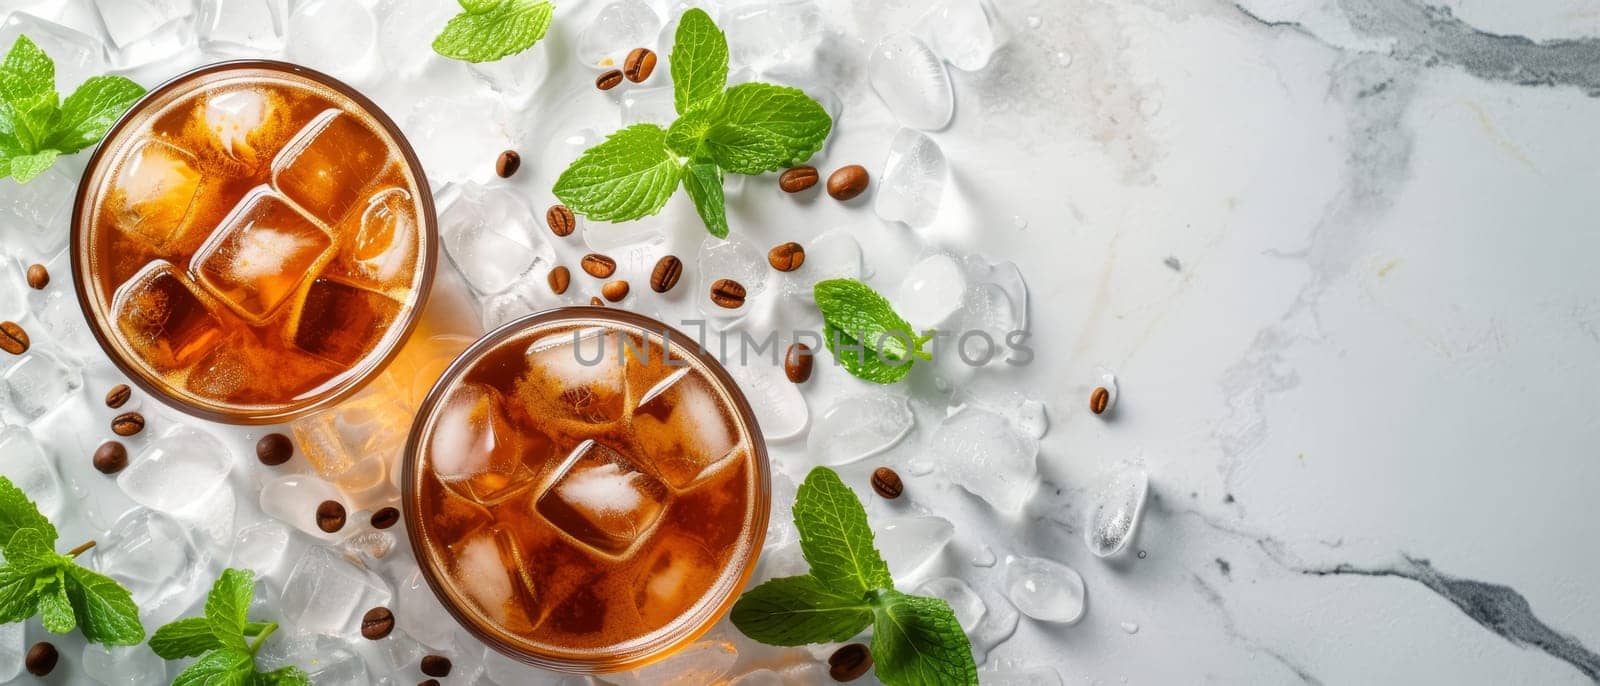 Cold black coffee with ice cubes and mint leaves on a white background. Cold brew - summer drinks